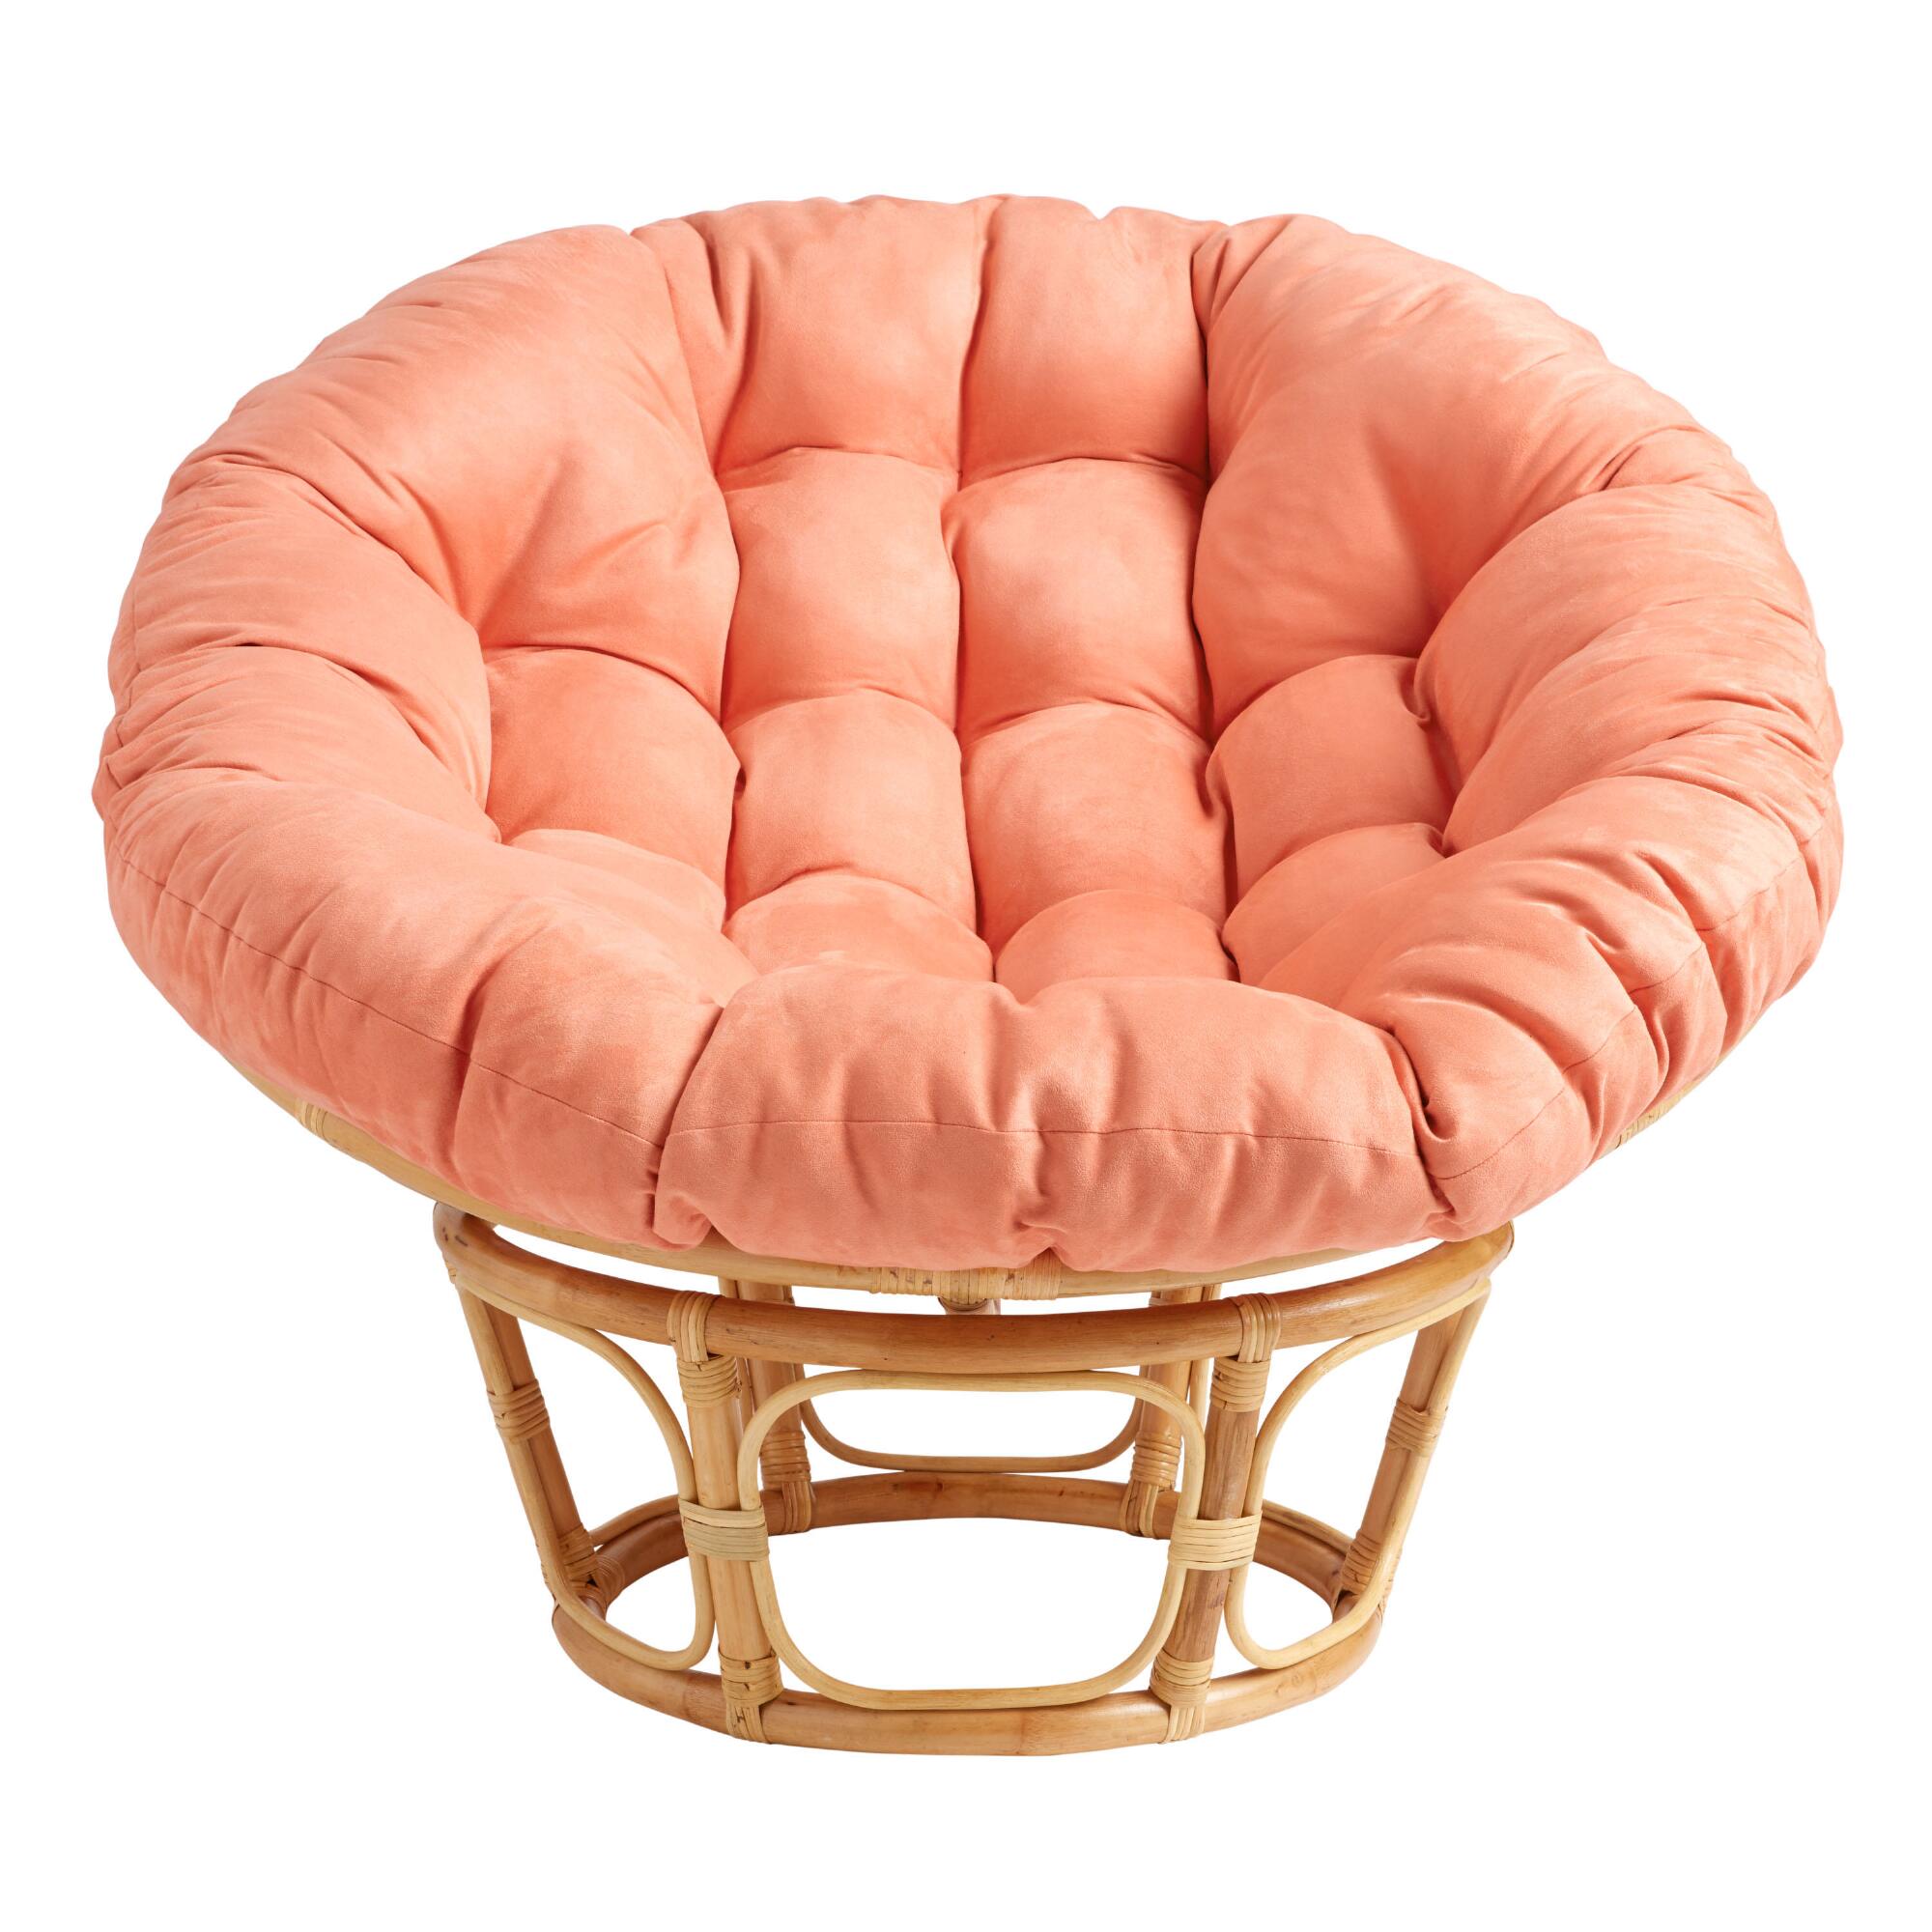 Coral Microsuede Papasan Chair Cushion: Pink - Cotton - 58" Round by World Market